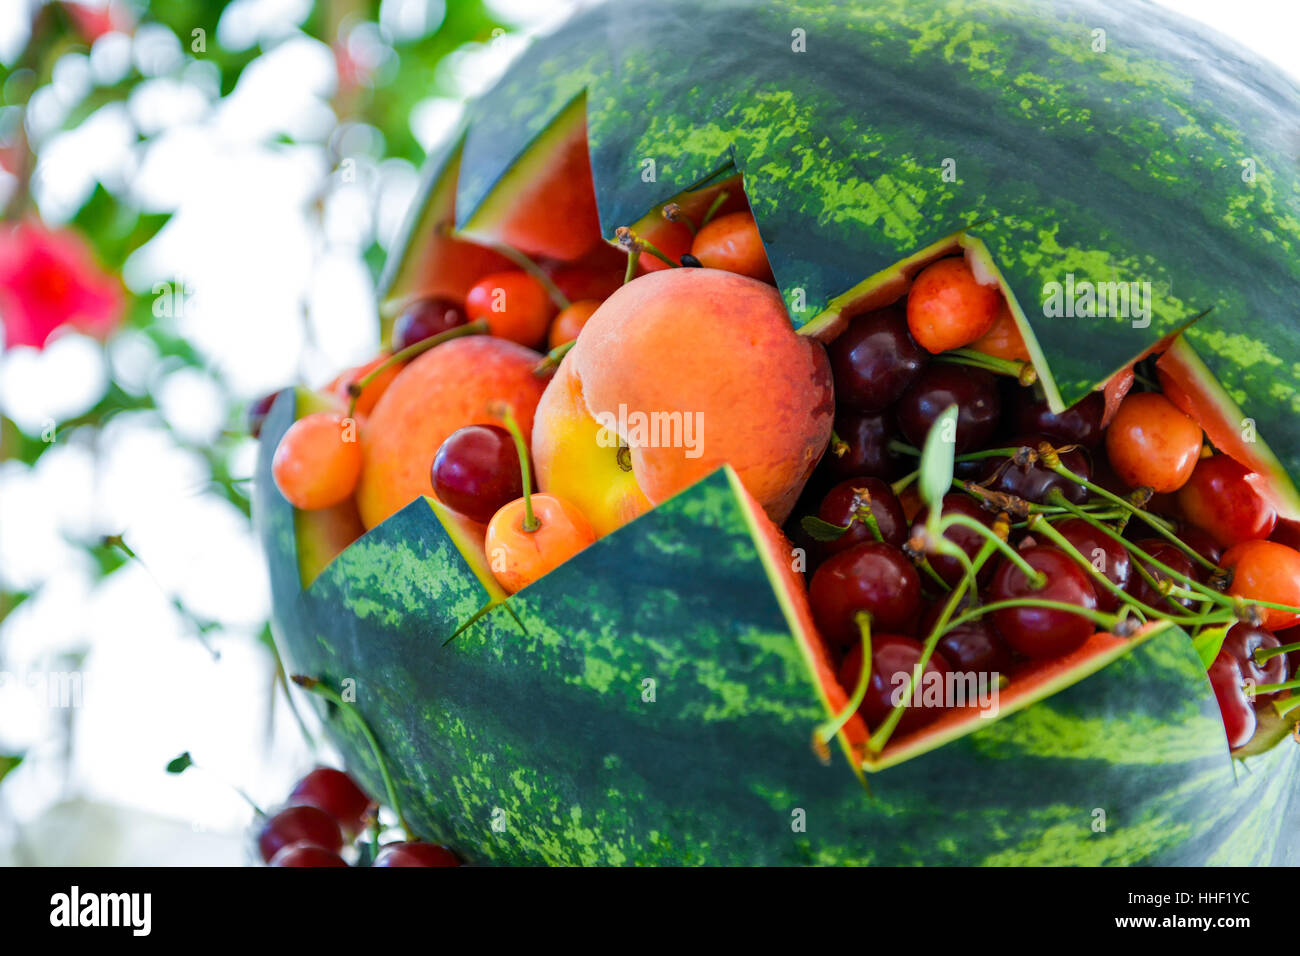 Arrangement with melon fruit in him on the table in natural light Stock Photo